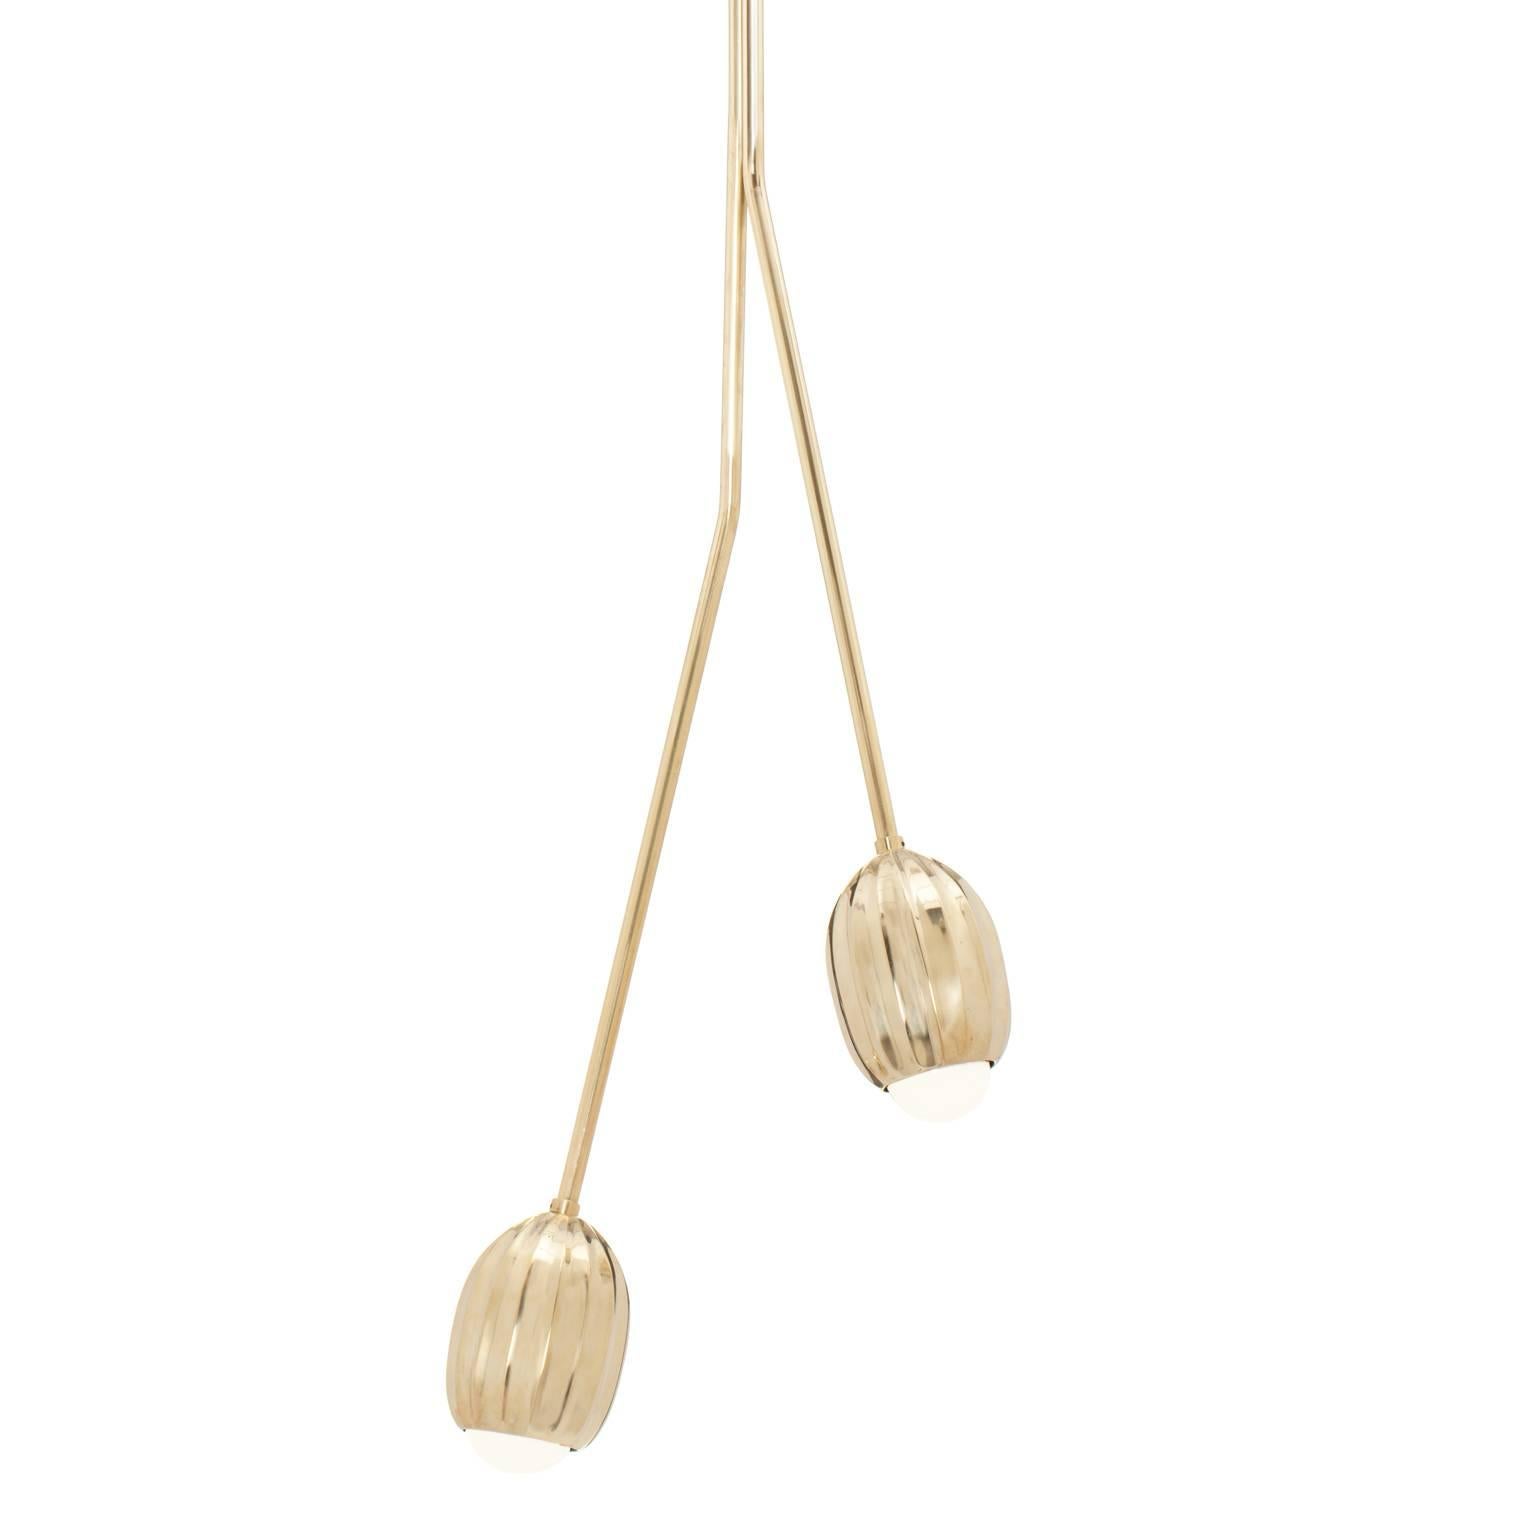 Poppy V. Floral Two-arm Chandelier in Lost Wax Cast Brass by Fred&Juul